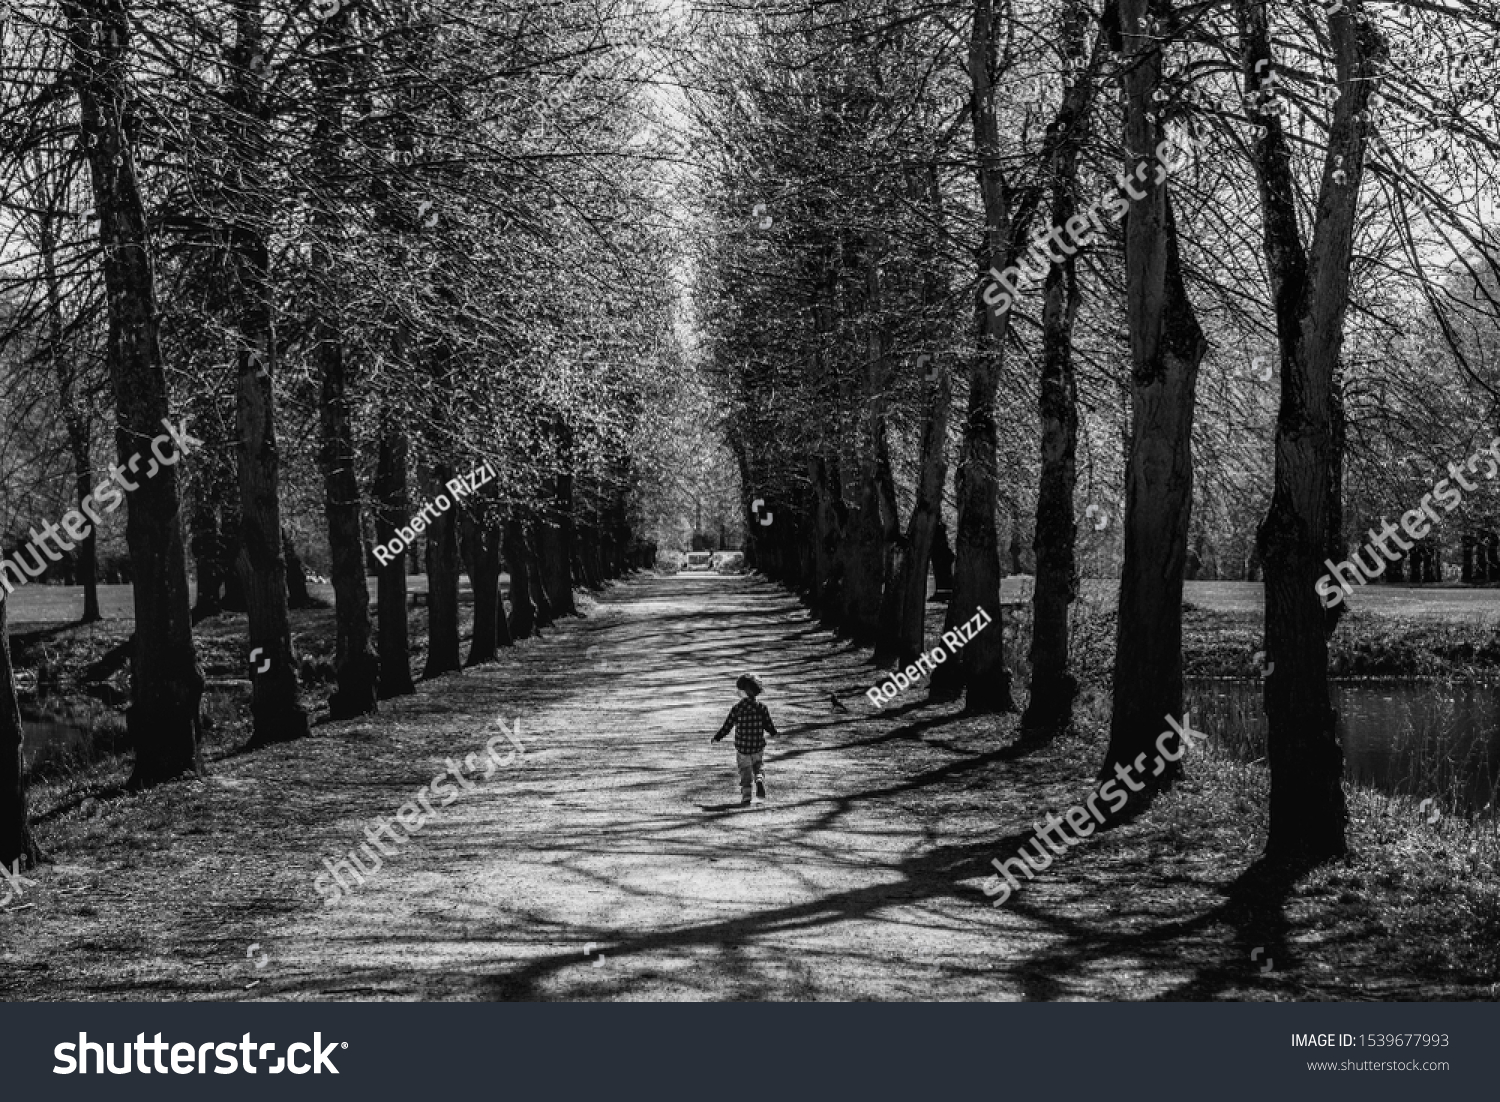 Back view of a young child running free on a boulevard with tall trees bears freedom, fun and liberty concept. A kid running free on an alley conveys carefree and childhood lighthearted feelings #1539677993